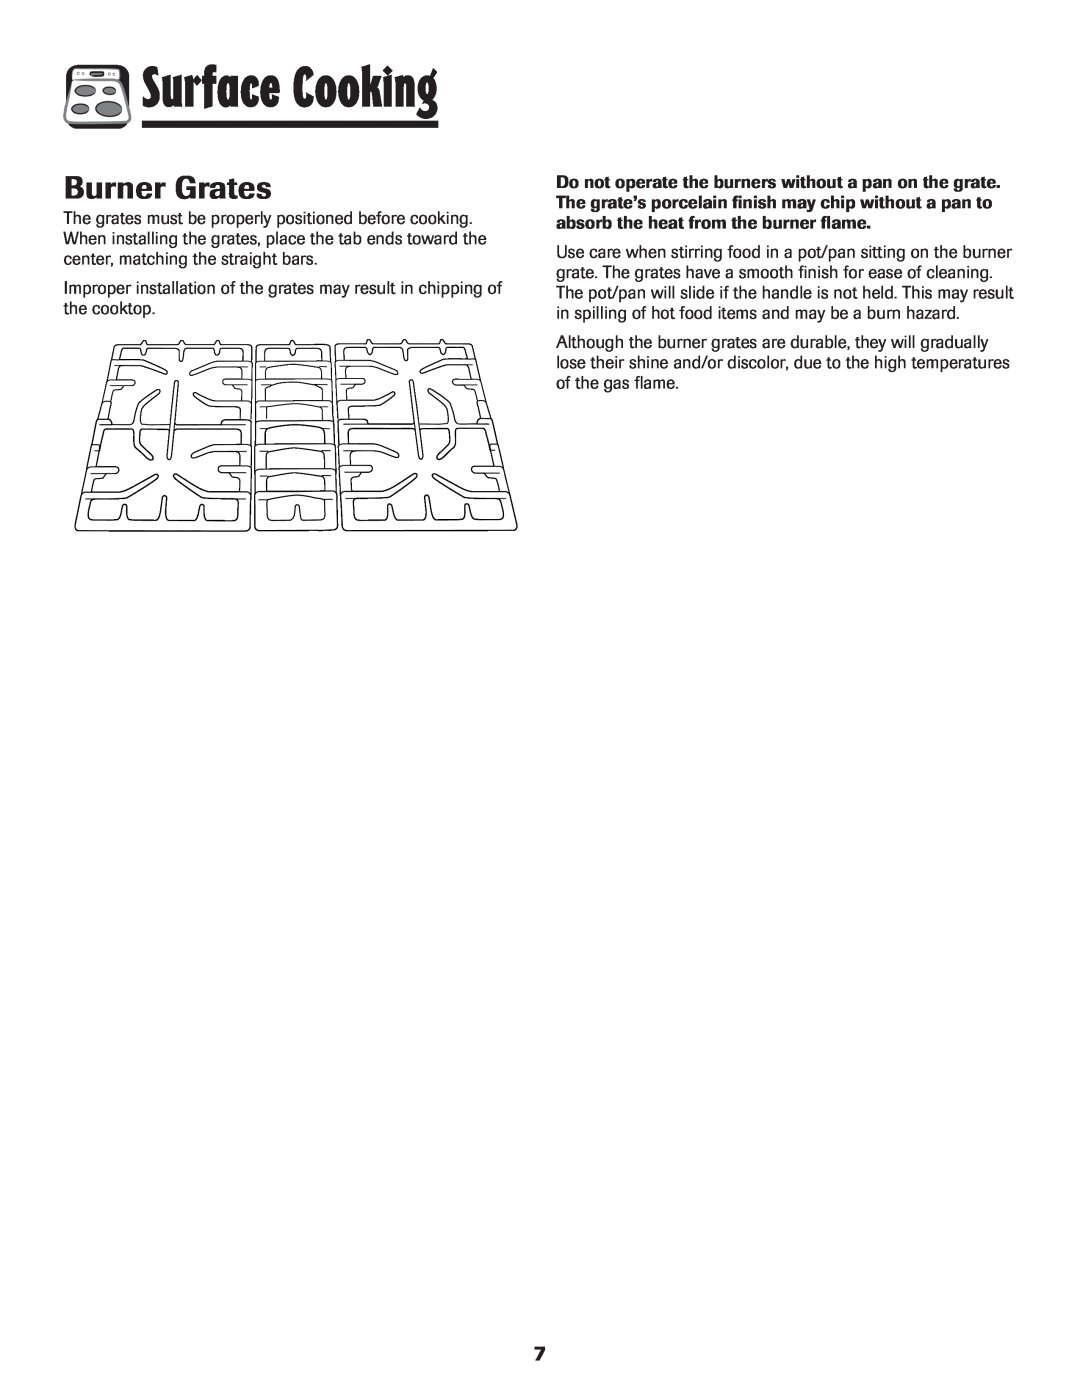 Amana AGR5835QDW important safety instructions Surface Cooking, Burner Grates 